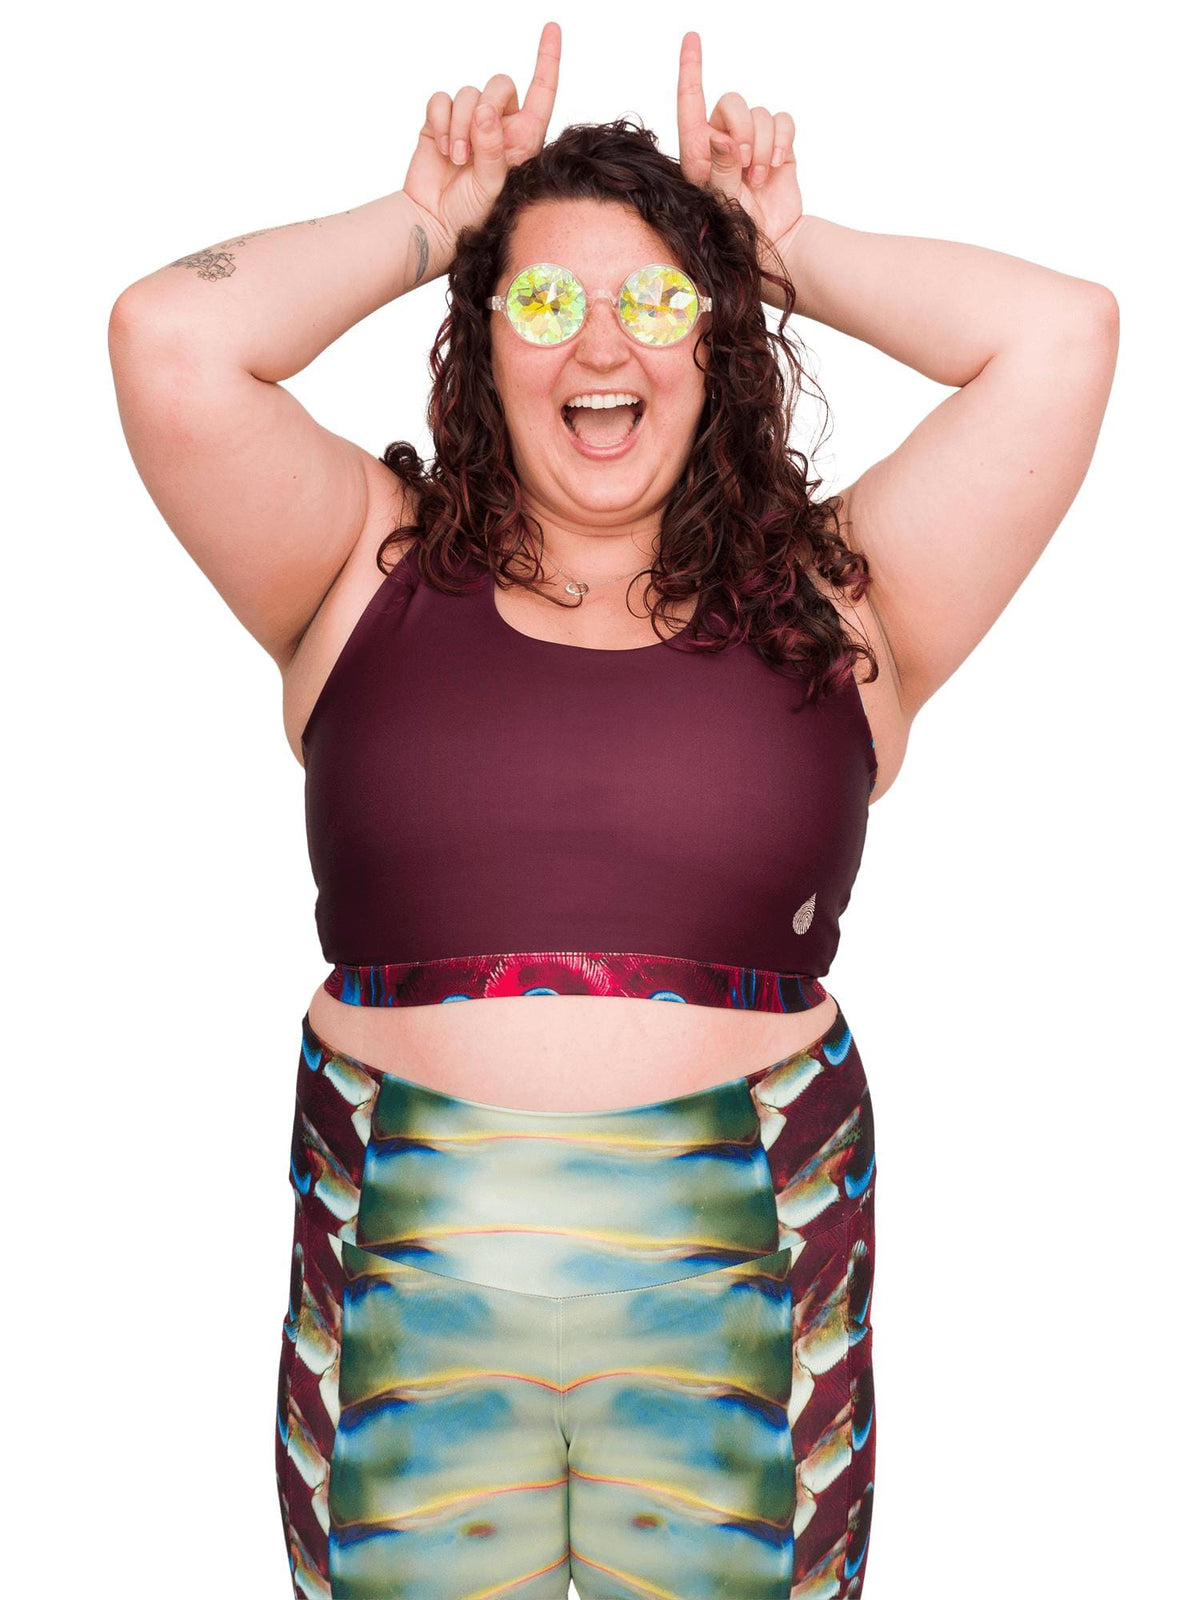 Model: Kela is a marine conservationist who strives to connect students with educational opportunities to help expand the reach of the marine science field. She is 5’5”, 185 lbs, 36F and is wearing a size XL top and legging.